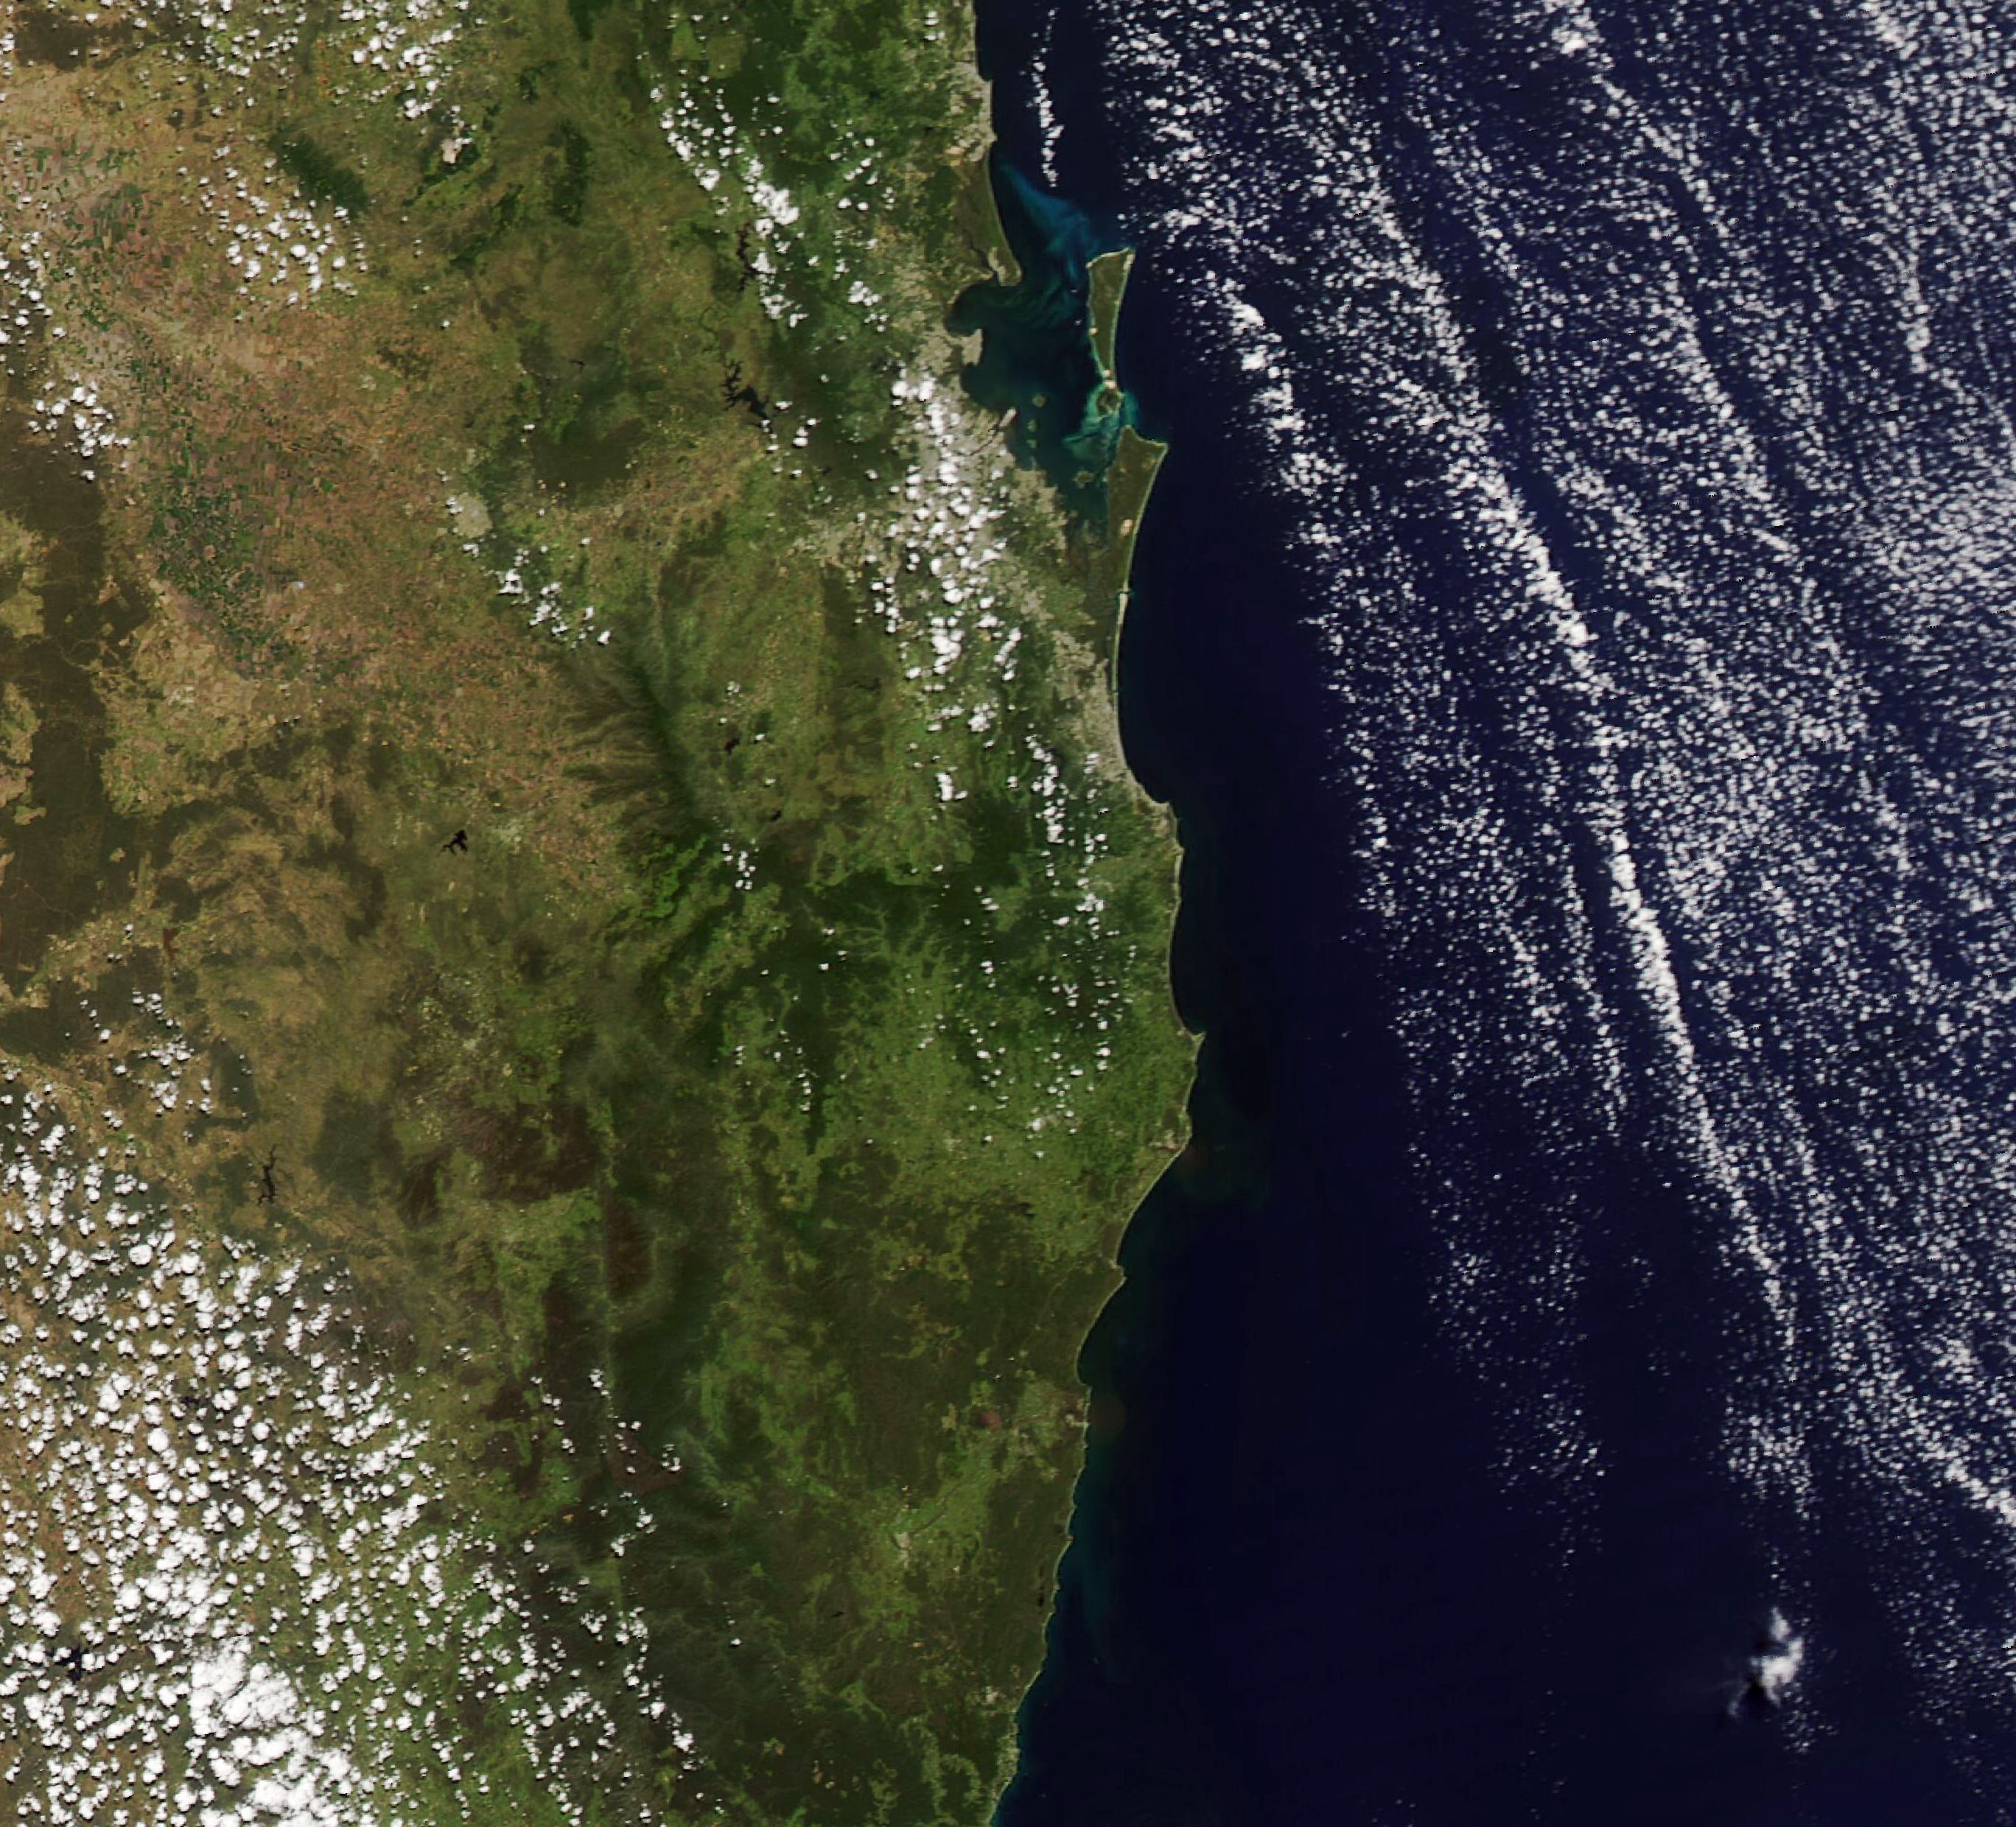 Floods Swamp Eastern Australia - related image preview